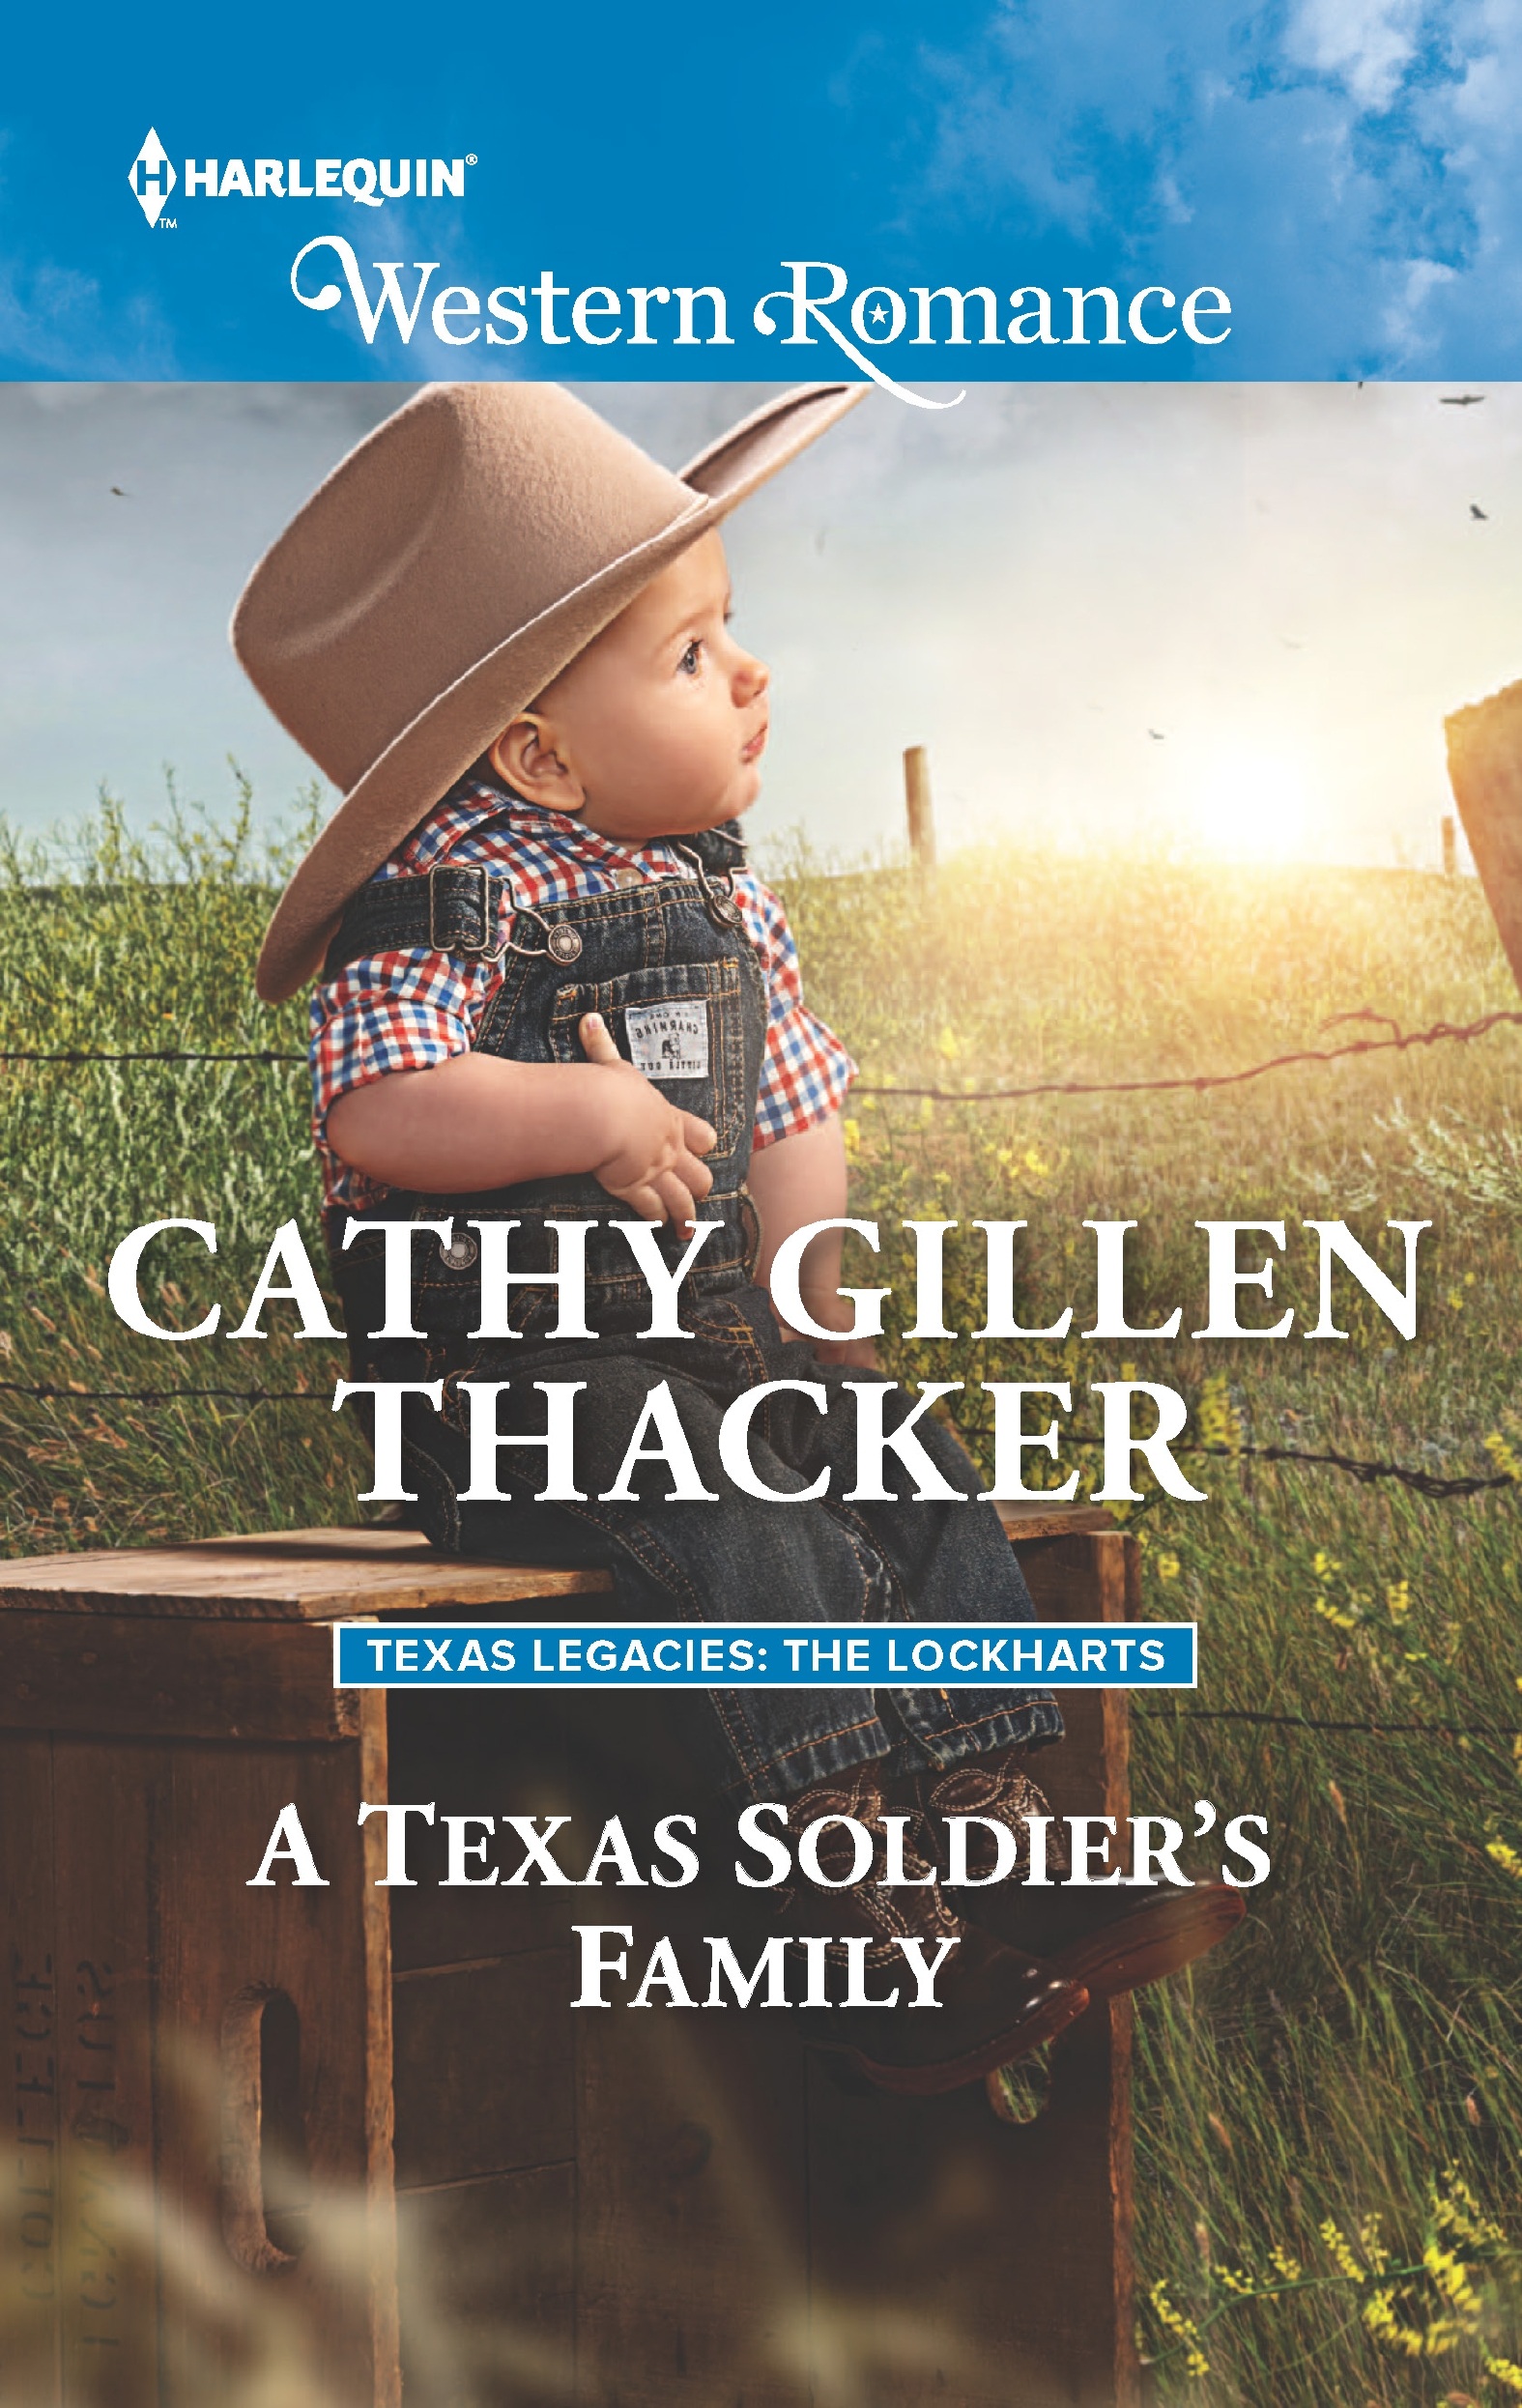 A Texas Soldier's Family (2016) by Cathy Gillen Thacker